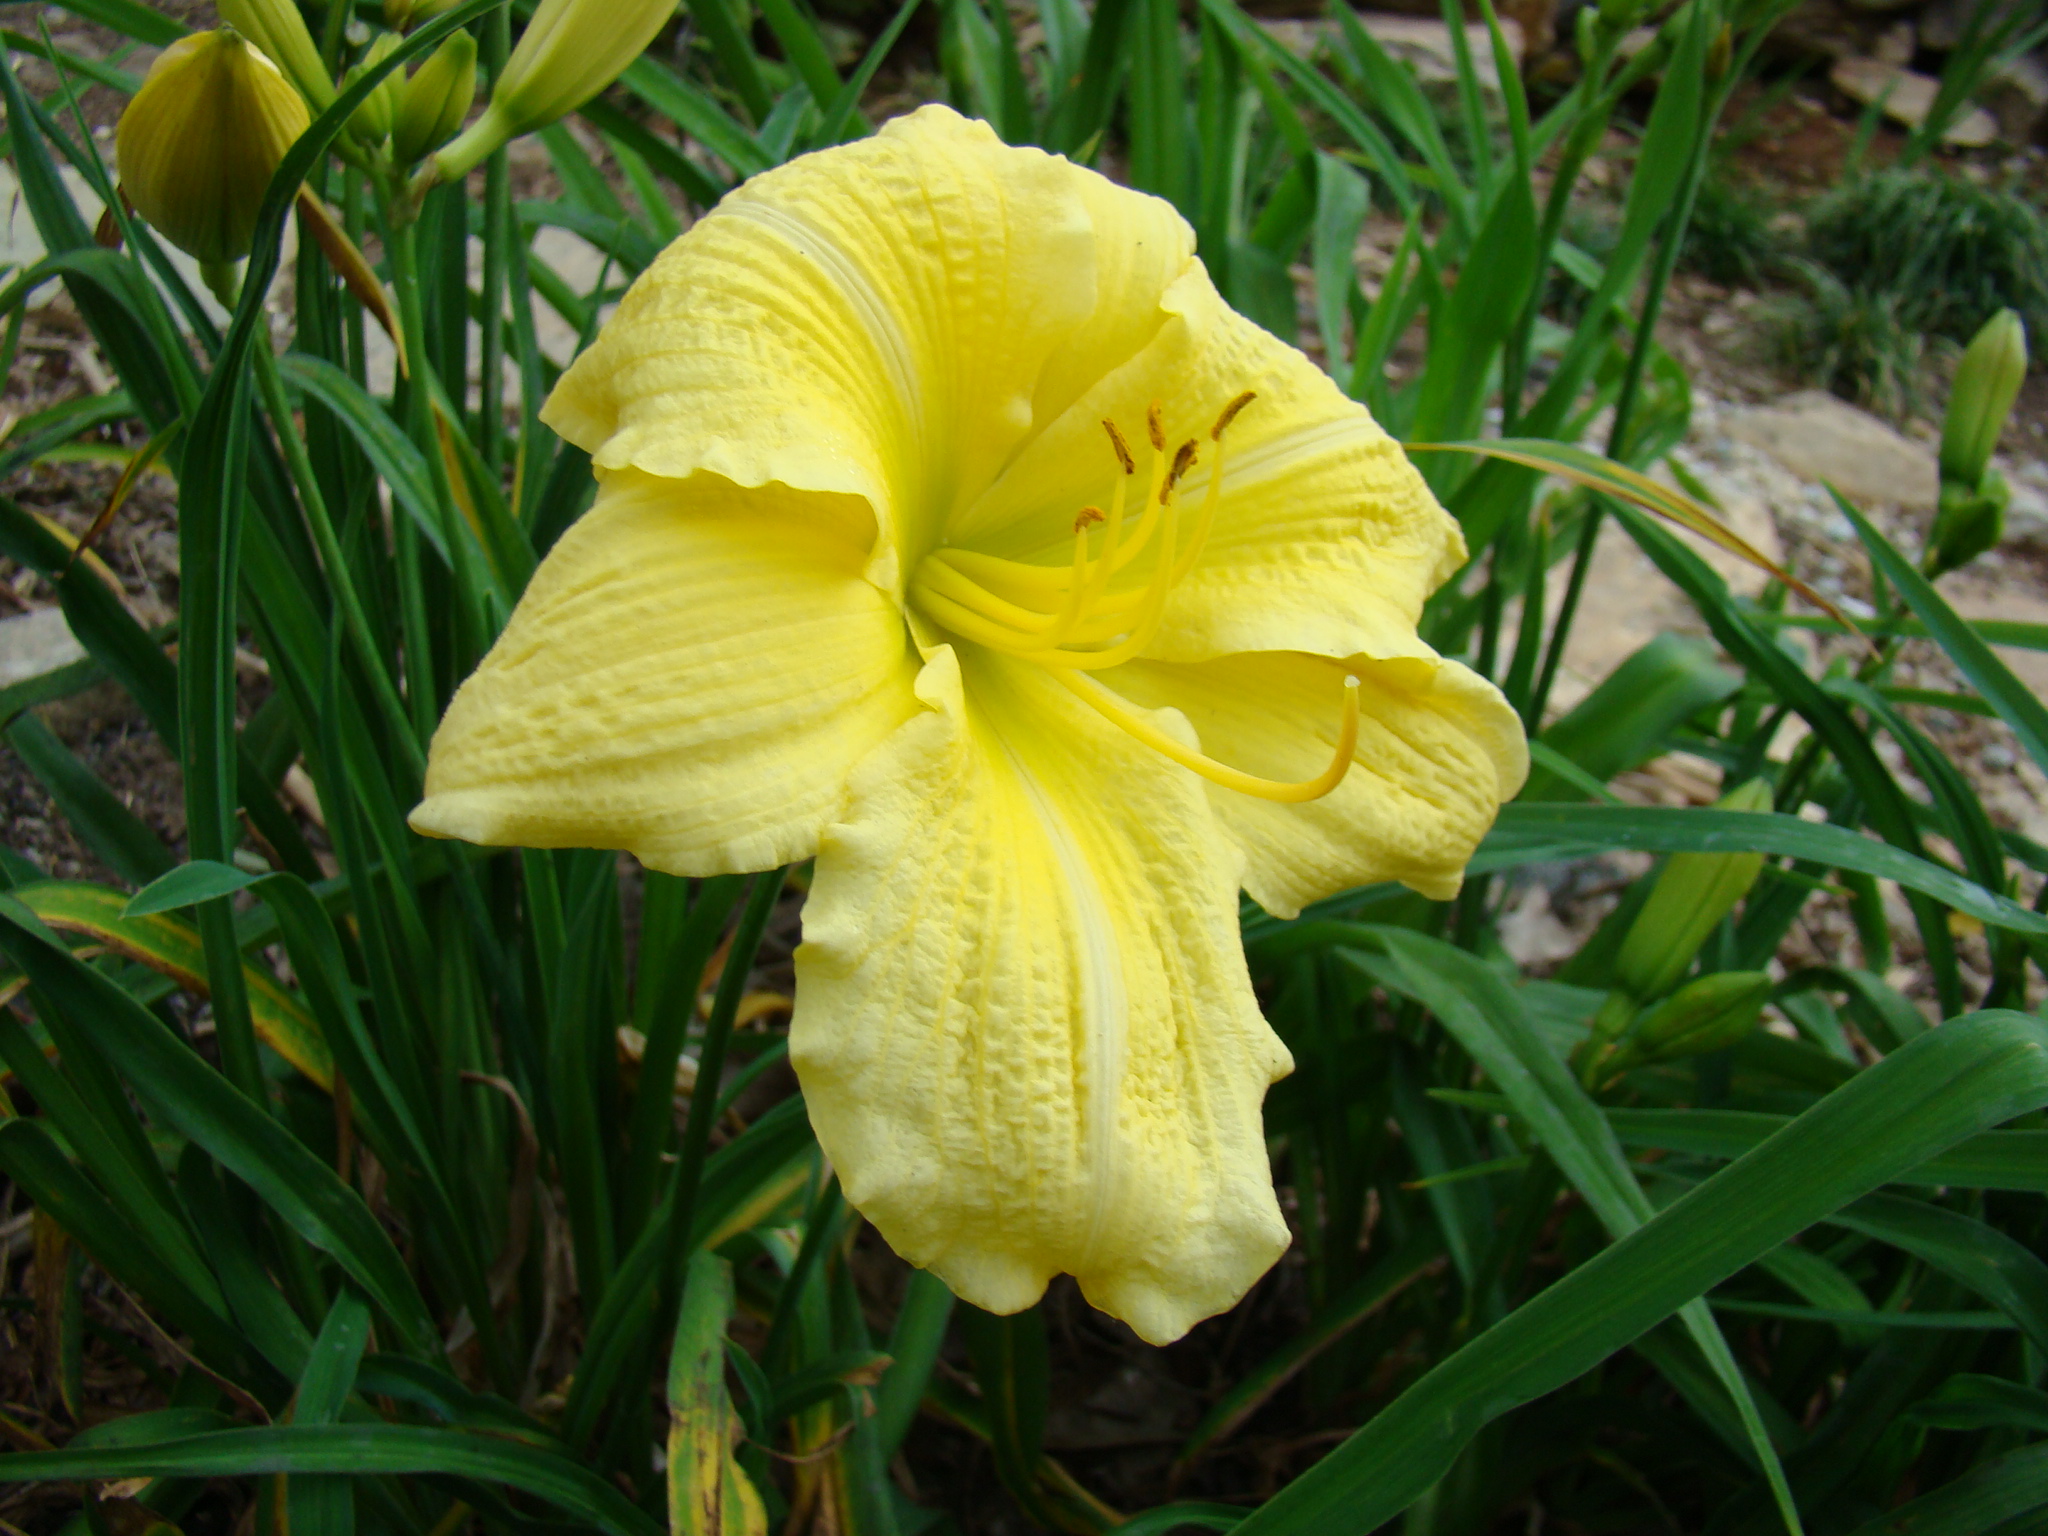 a yellow flower growing in the middle of a bed of green plants